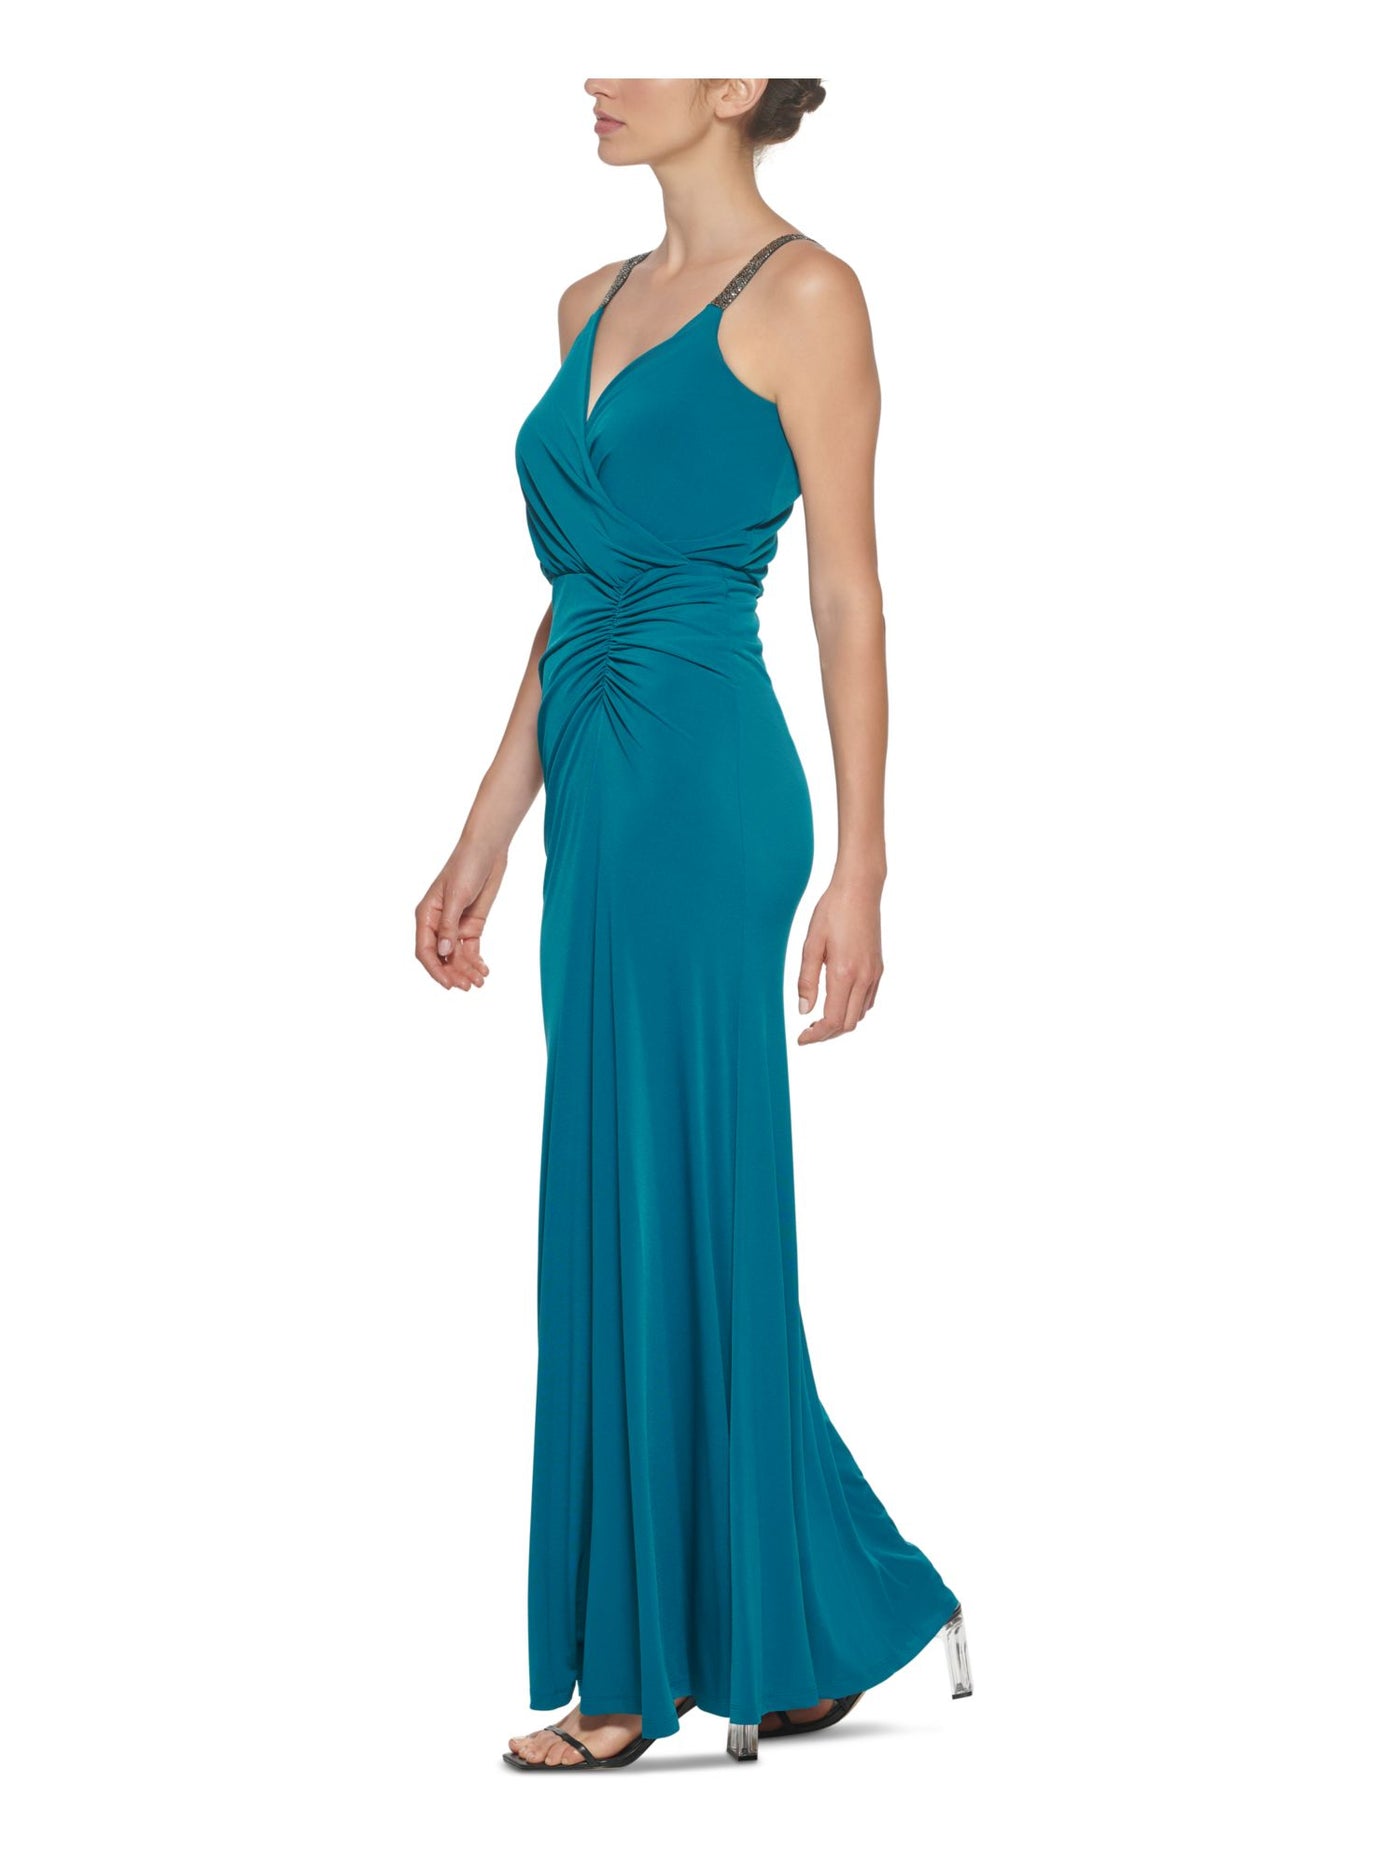 CALVIN KLEIN Womens Teal Stretch Ruched Zippered Embellished Straps Jersey-knit Spaghetti Strap Surplice Neckline Full-Length Cocktail Gown Dress 16